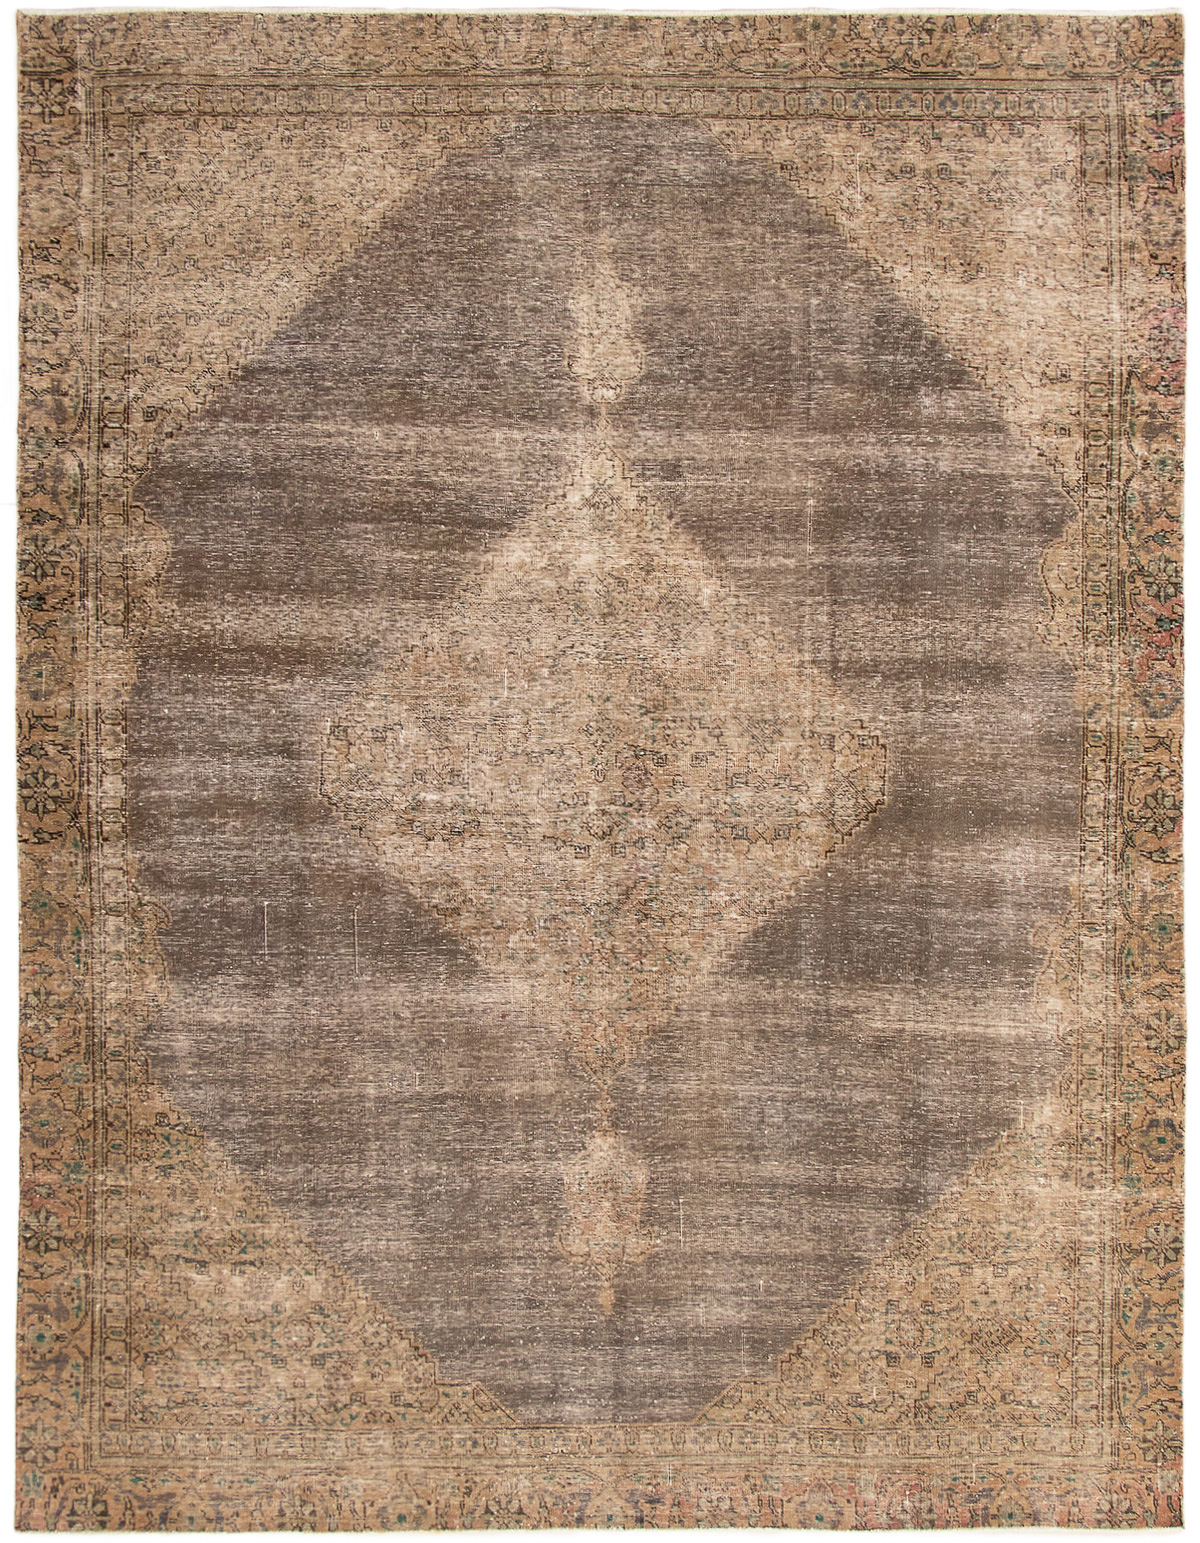 Hand-knotted Color Transition Dark Grey Wool Rug 8'10" x 11'6" Size: 8'10" x 11'6"  